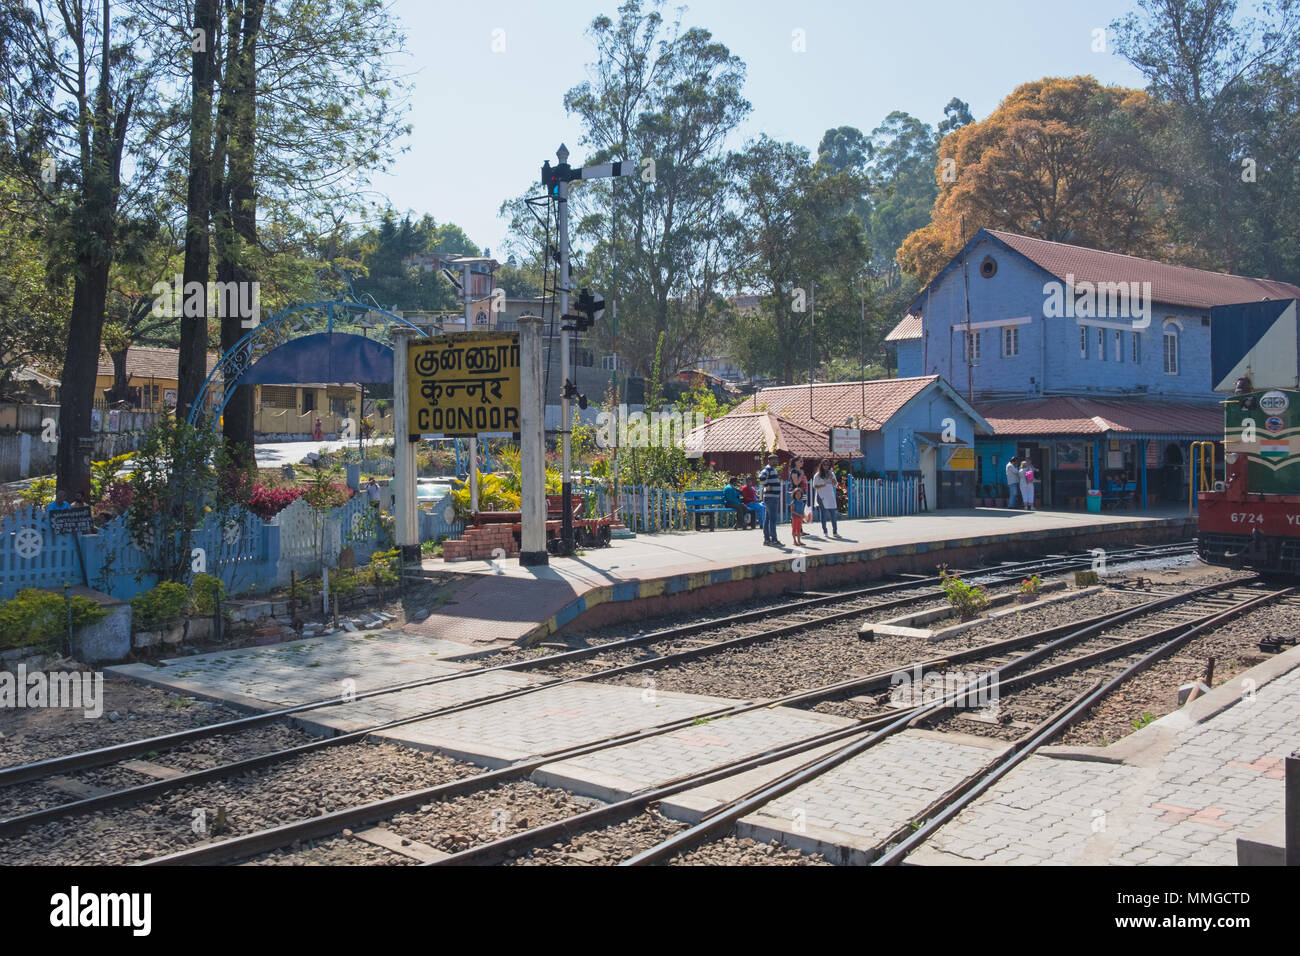 Coonoor, India - March 4, 2018: Scene at Coonoor station on the Nilgiri Mountain Railway, a Unesco World Heritage site built by the British in 1908 Stock Photo